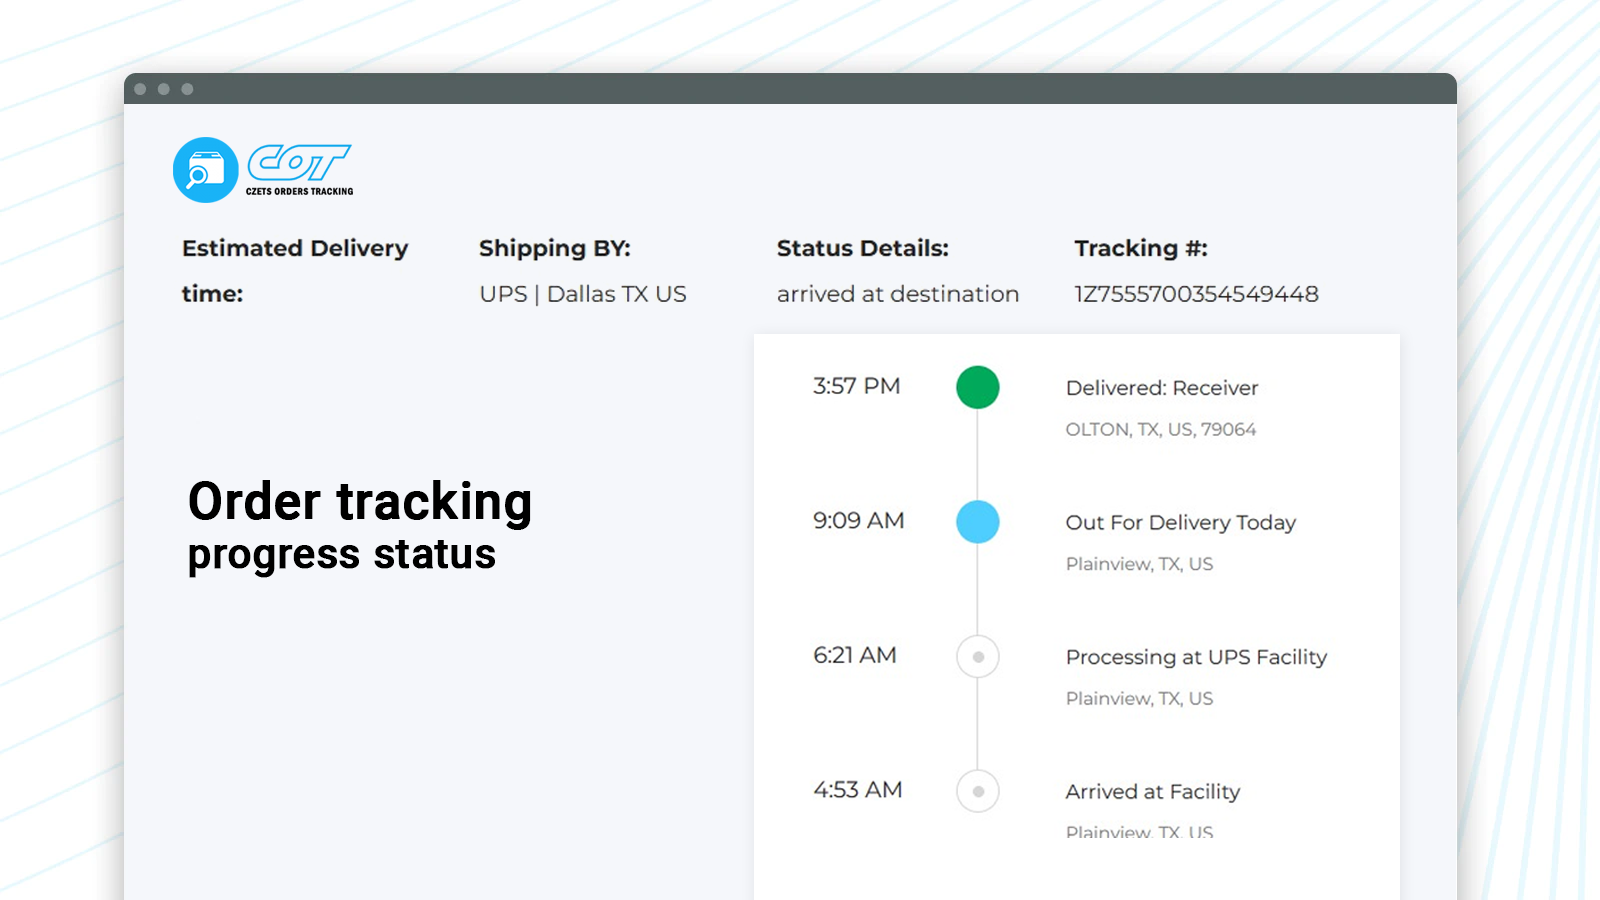 czets order tracking status page